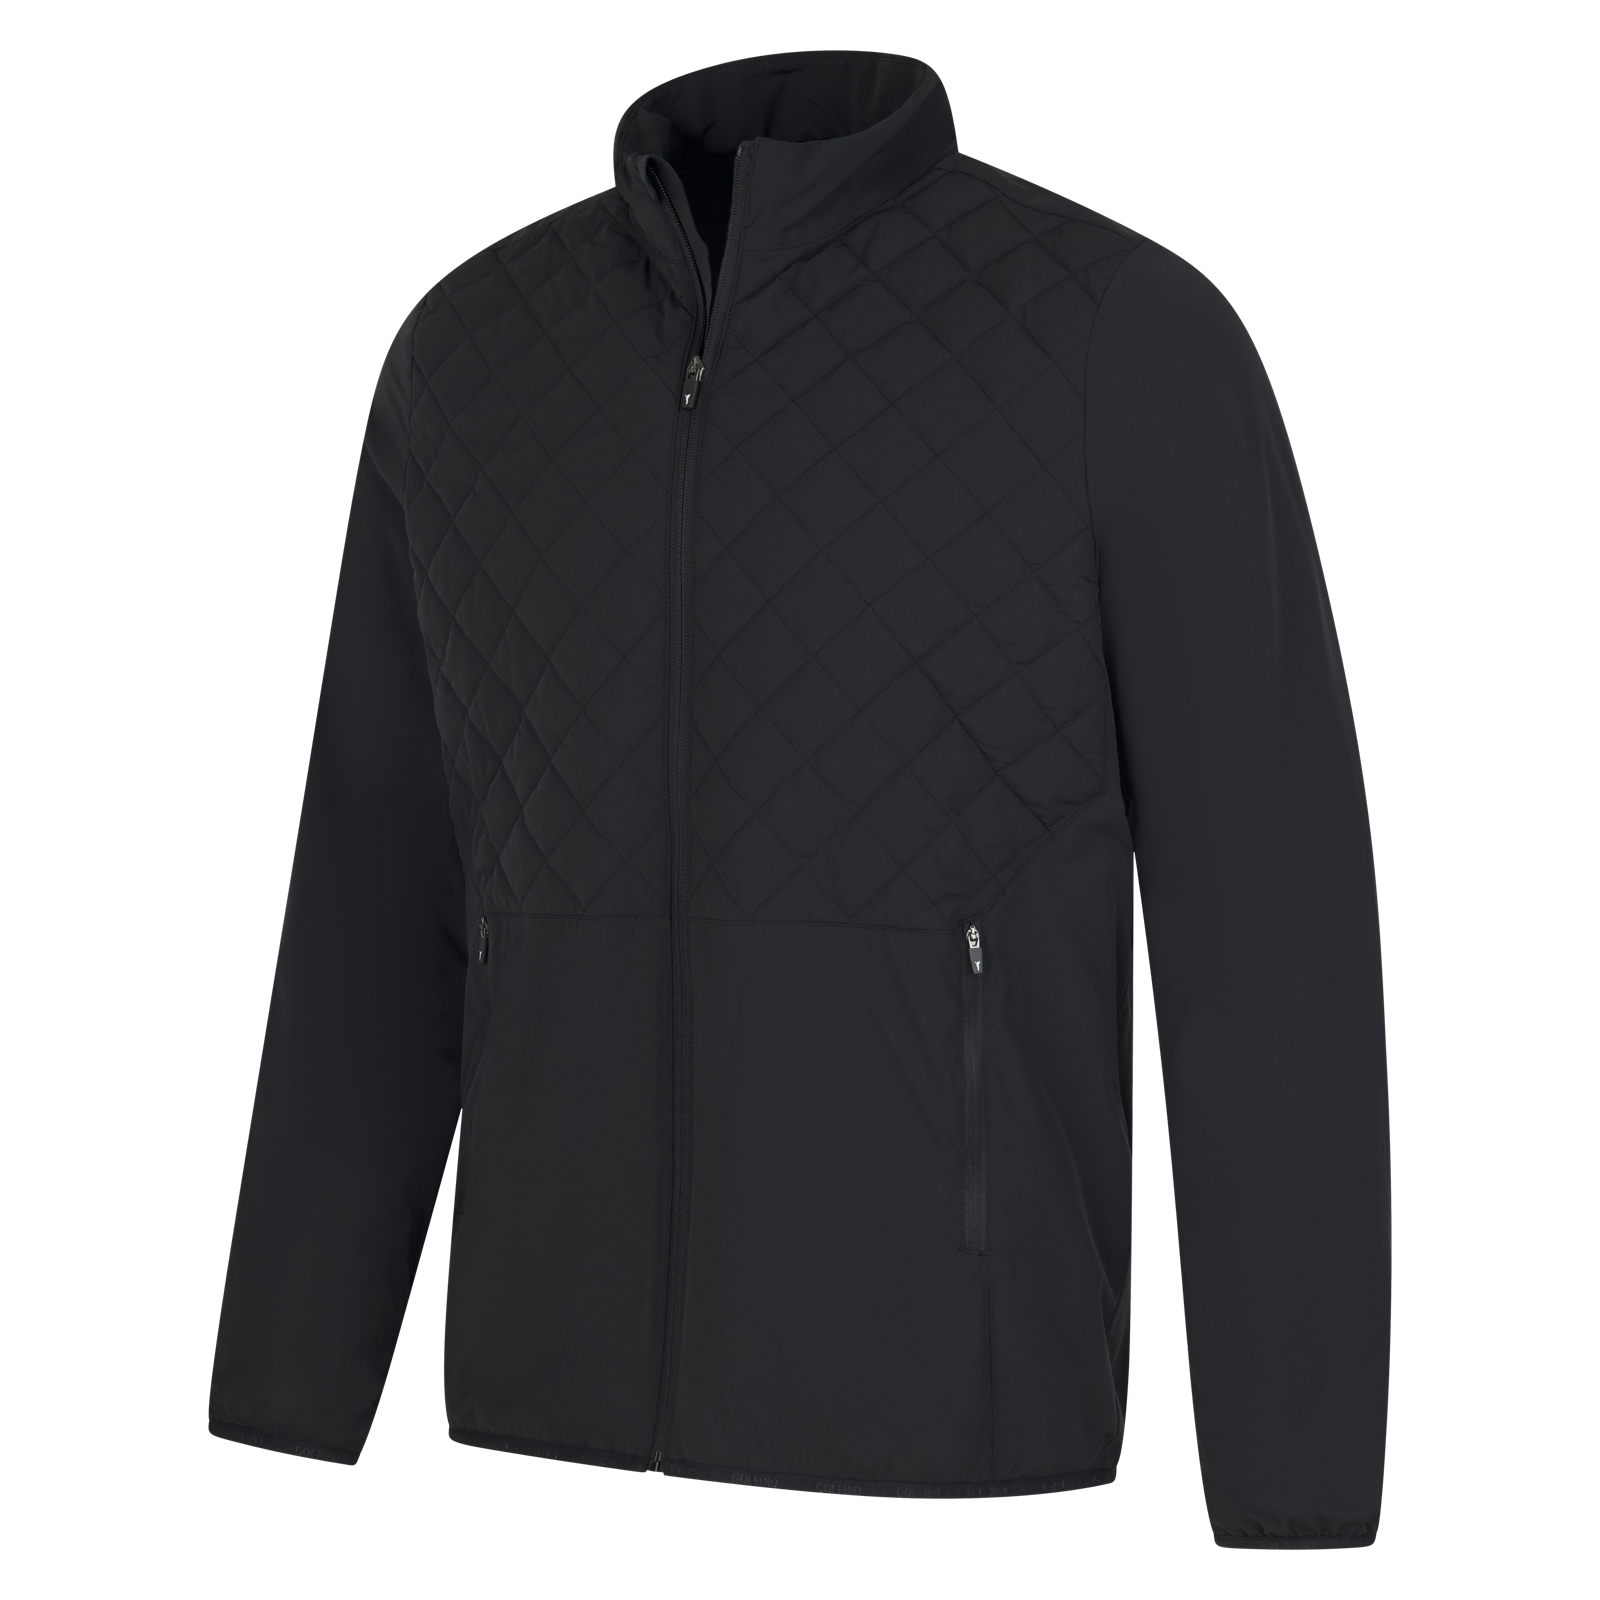 Men's golf jacket with triple function